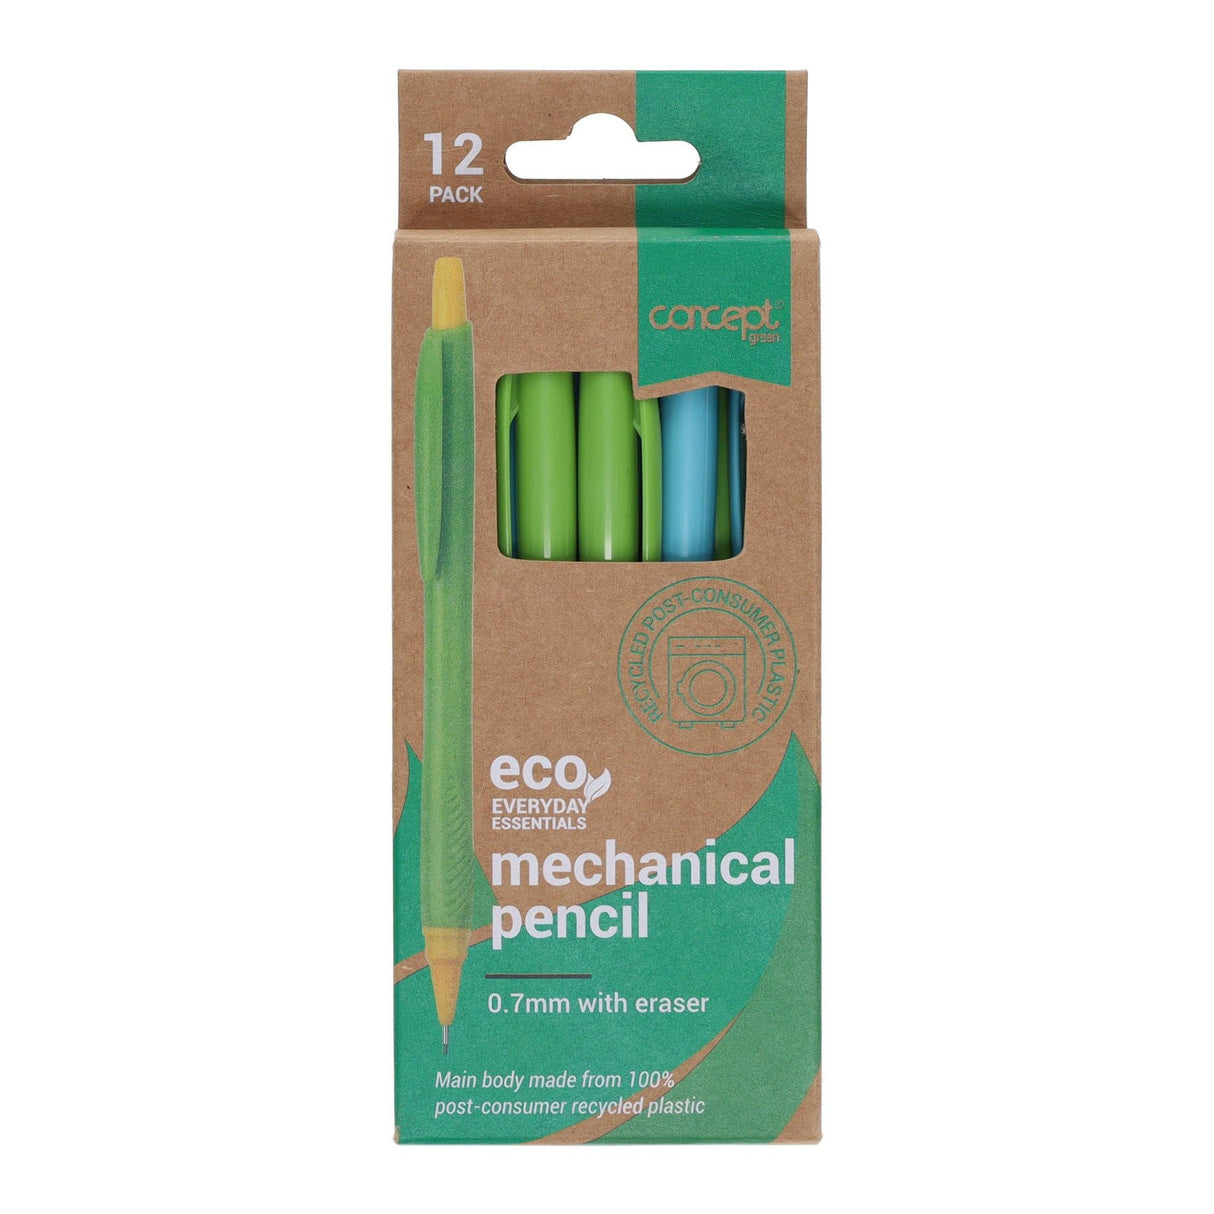 Concept Green Mechanical Pencils With Eraser - 0.7mm - Pack of 12 | Stationery Shop UK